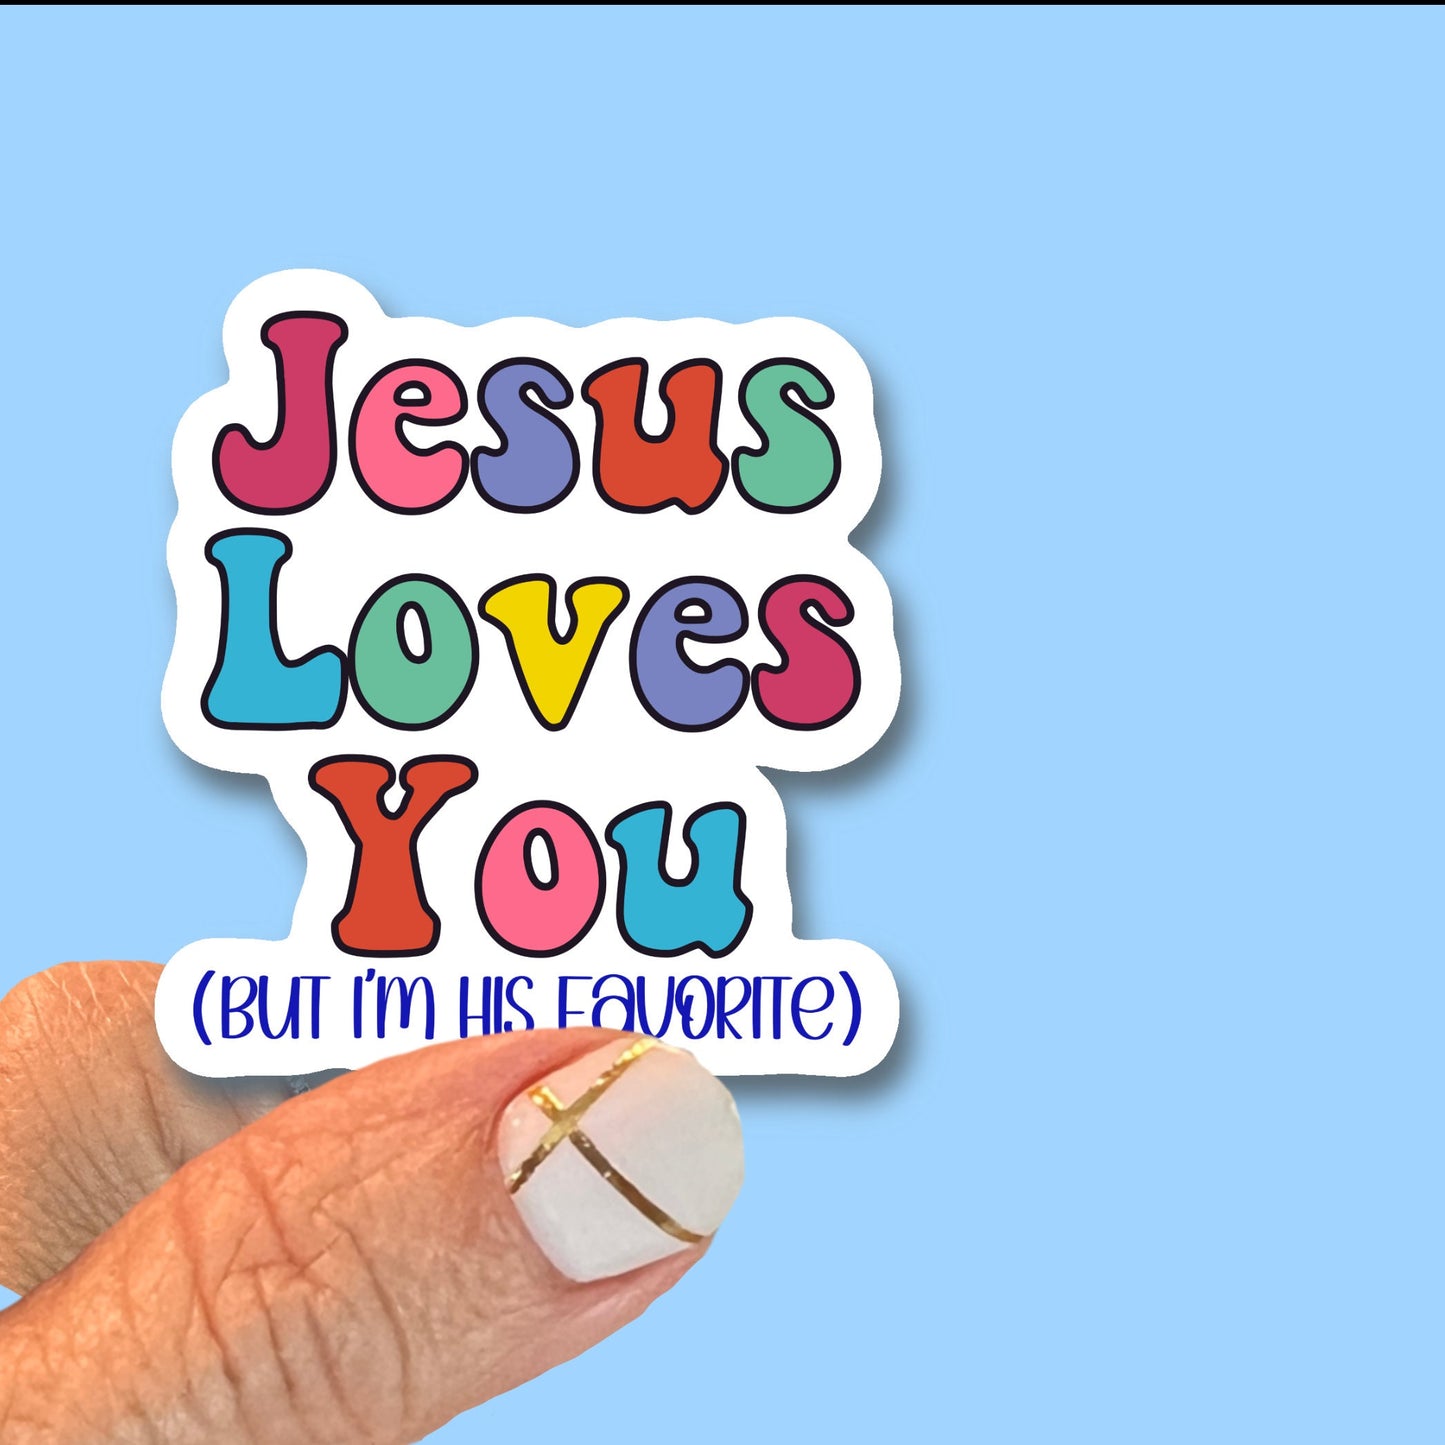 Jesus loves you, but I'm his favorite - Fun Christian Faith UV/ Waterproof Vinyl Sticker/ Decal- Choice of Size